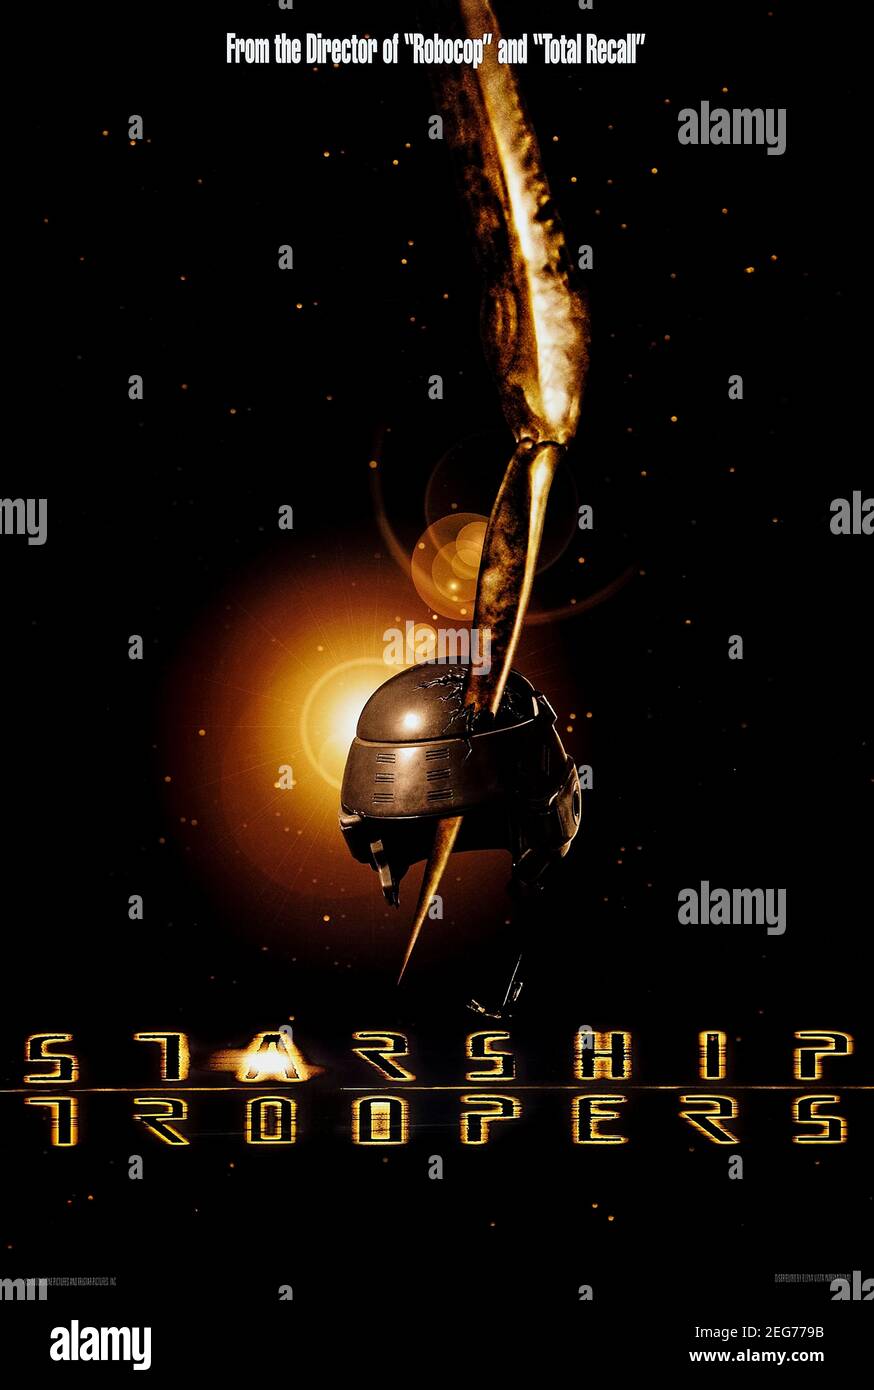 Starship Troopers (1997) directed by Paul Verhoeven and starring Casper Van Dien, Denise Richards, Dina Meyer and Neil Patrick Harris. No holds barred adaptation of Robert A. Heinlein's novel about a future militaristic and fascist human federation at war with giant alien insects bought to you by the writers and director of Robocop. Stock Photo